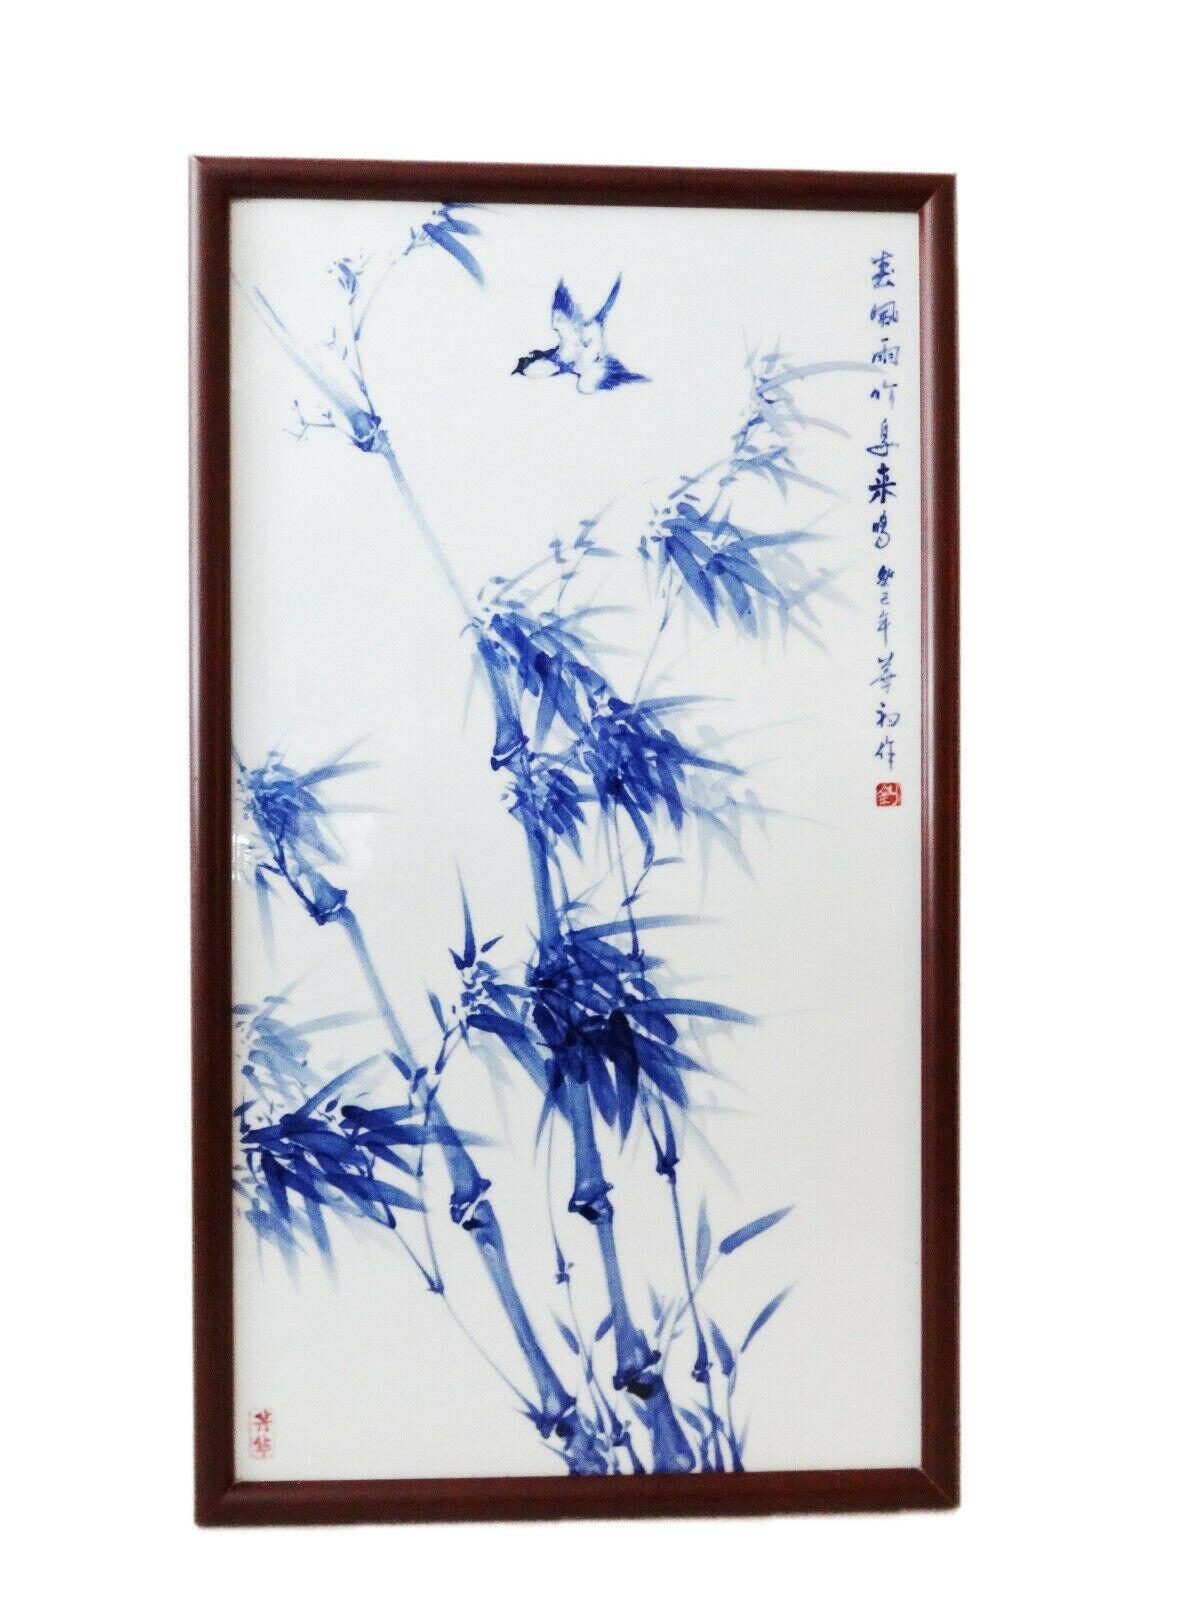 Superb Porcelain Wall Hanging Plaque w/ bird  /bamboo 33.5"h by 19" w